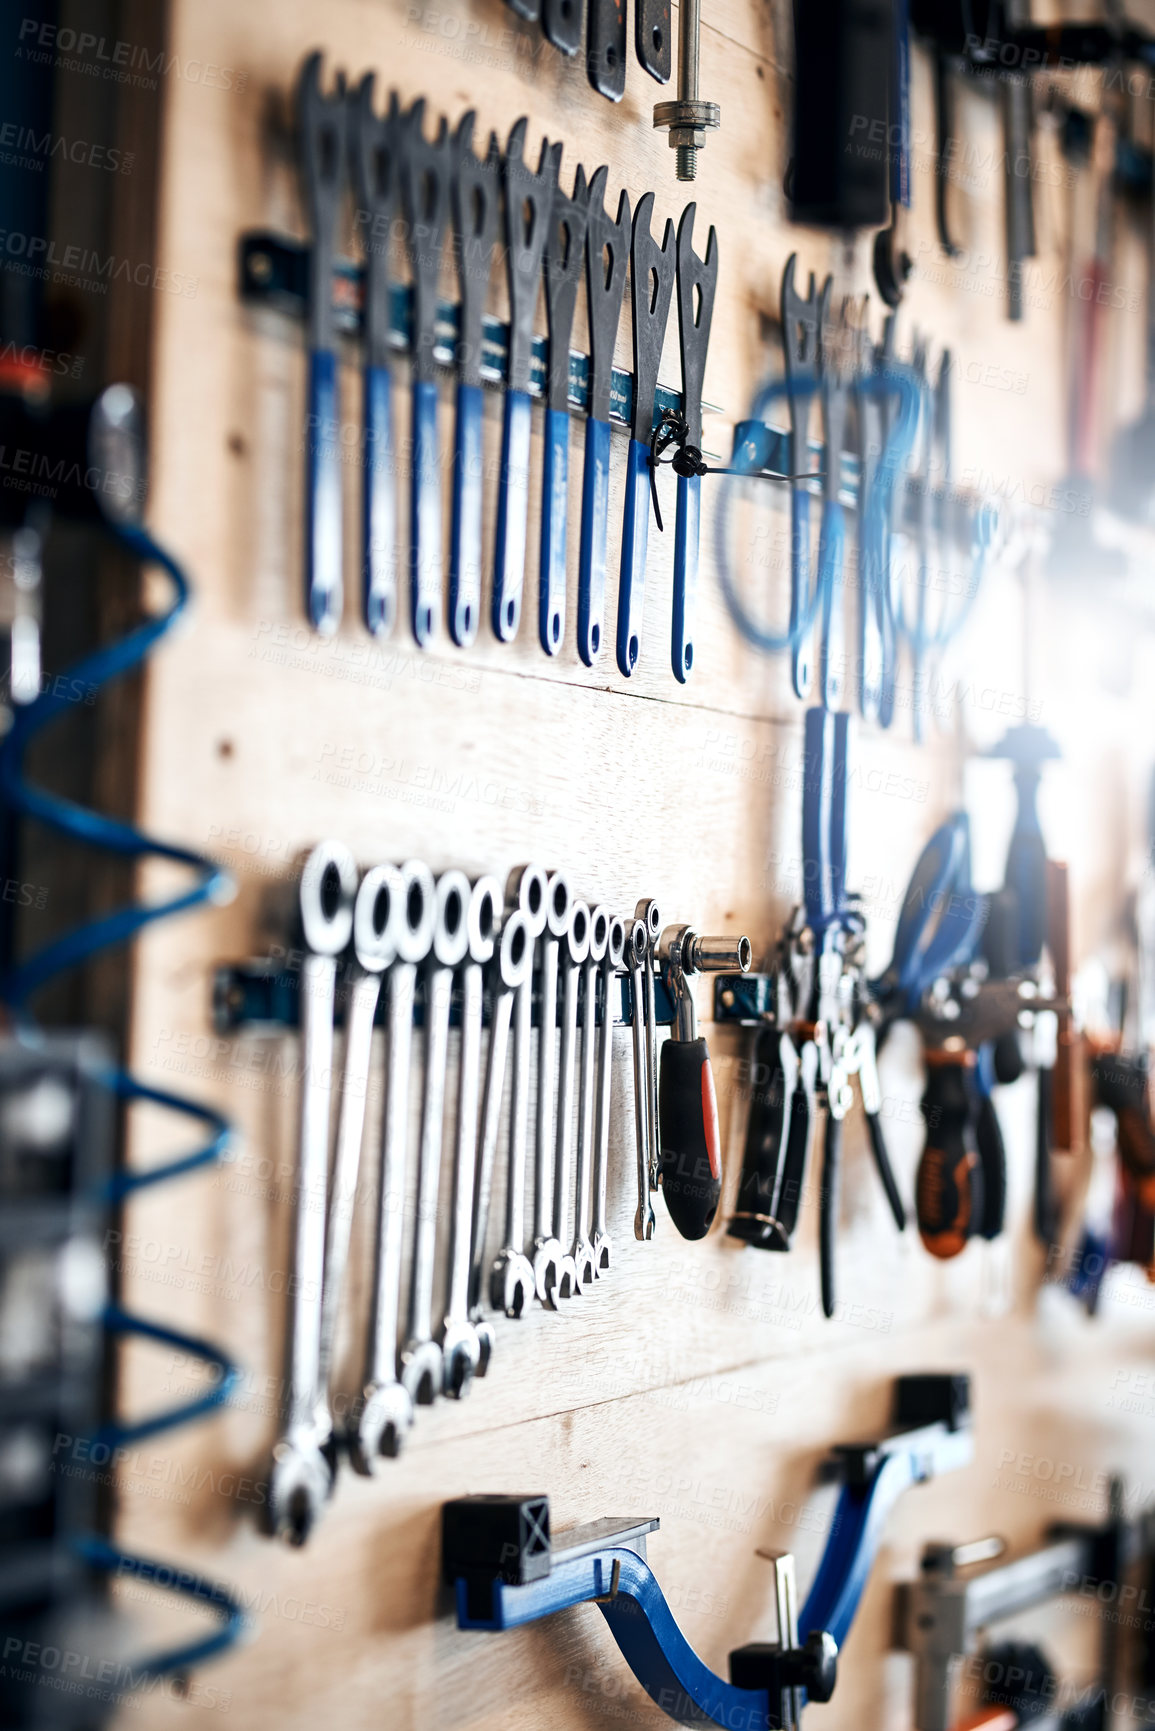 Buy stock photo Shot of tools in a workshop